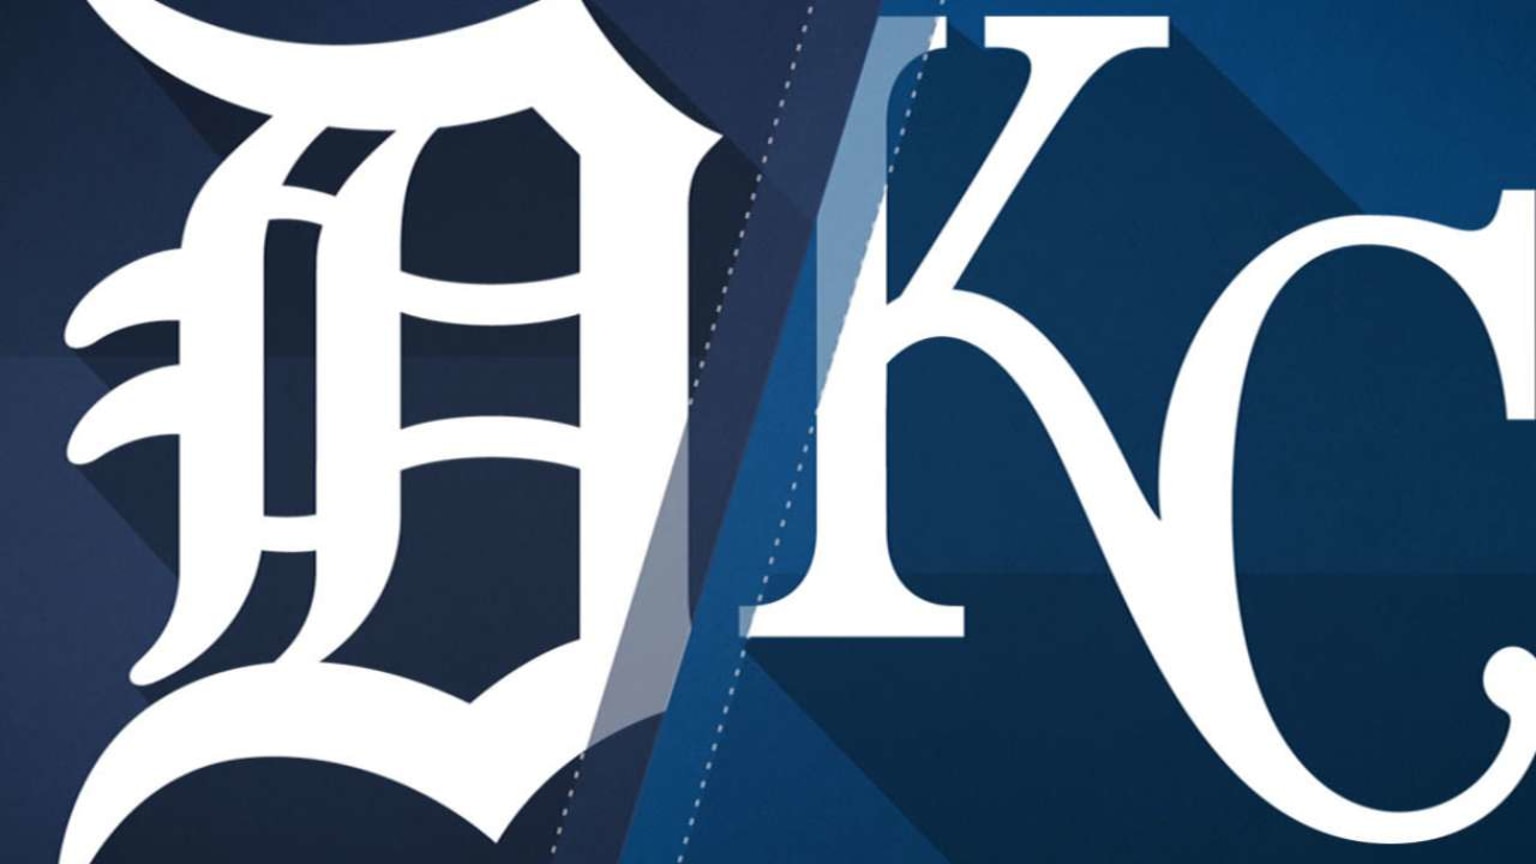 Tigers 7, Royals 1: Tigers win 5th straight, Jhonny Peralta, Prince Fielder,  Delmon Young go deep - Bless You Boys